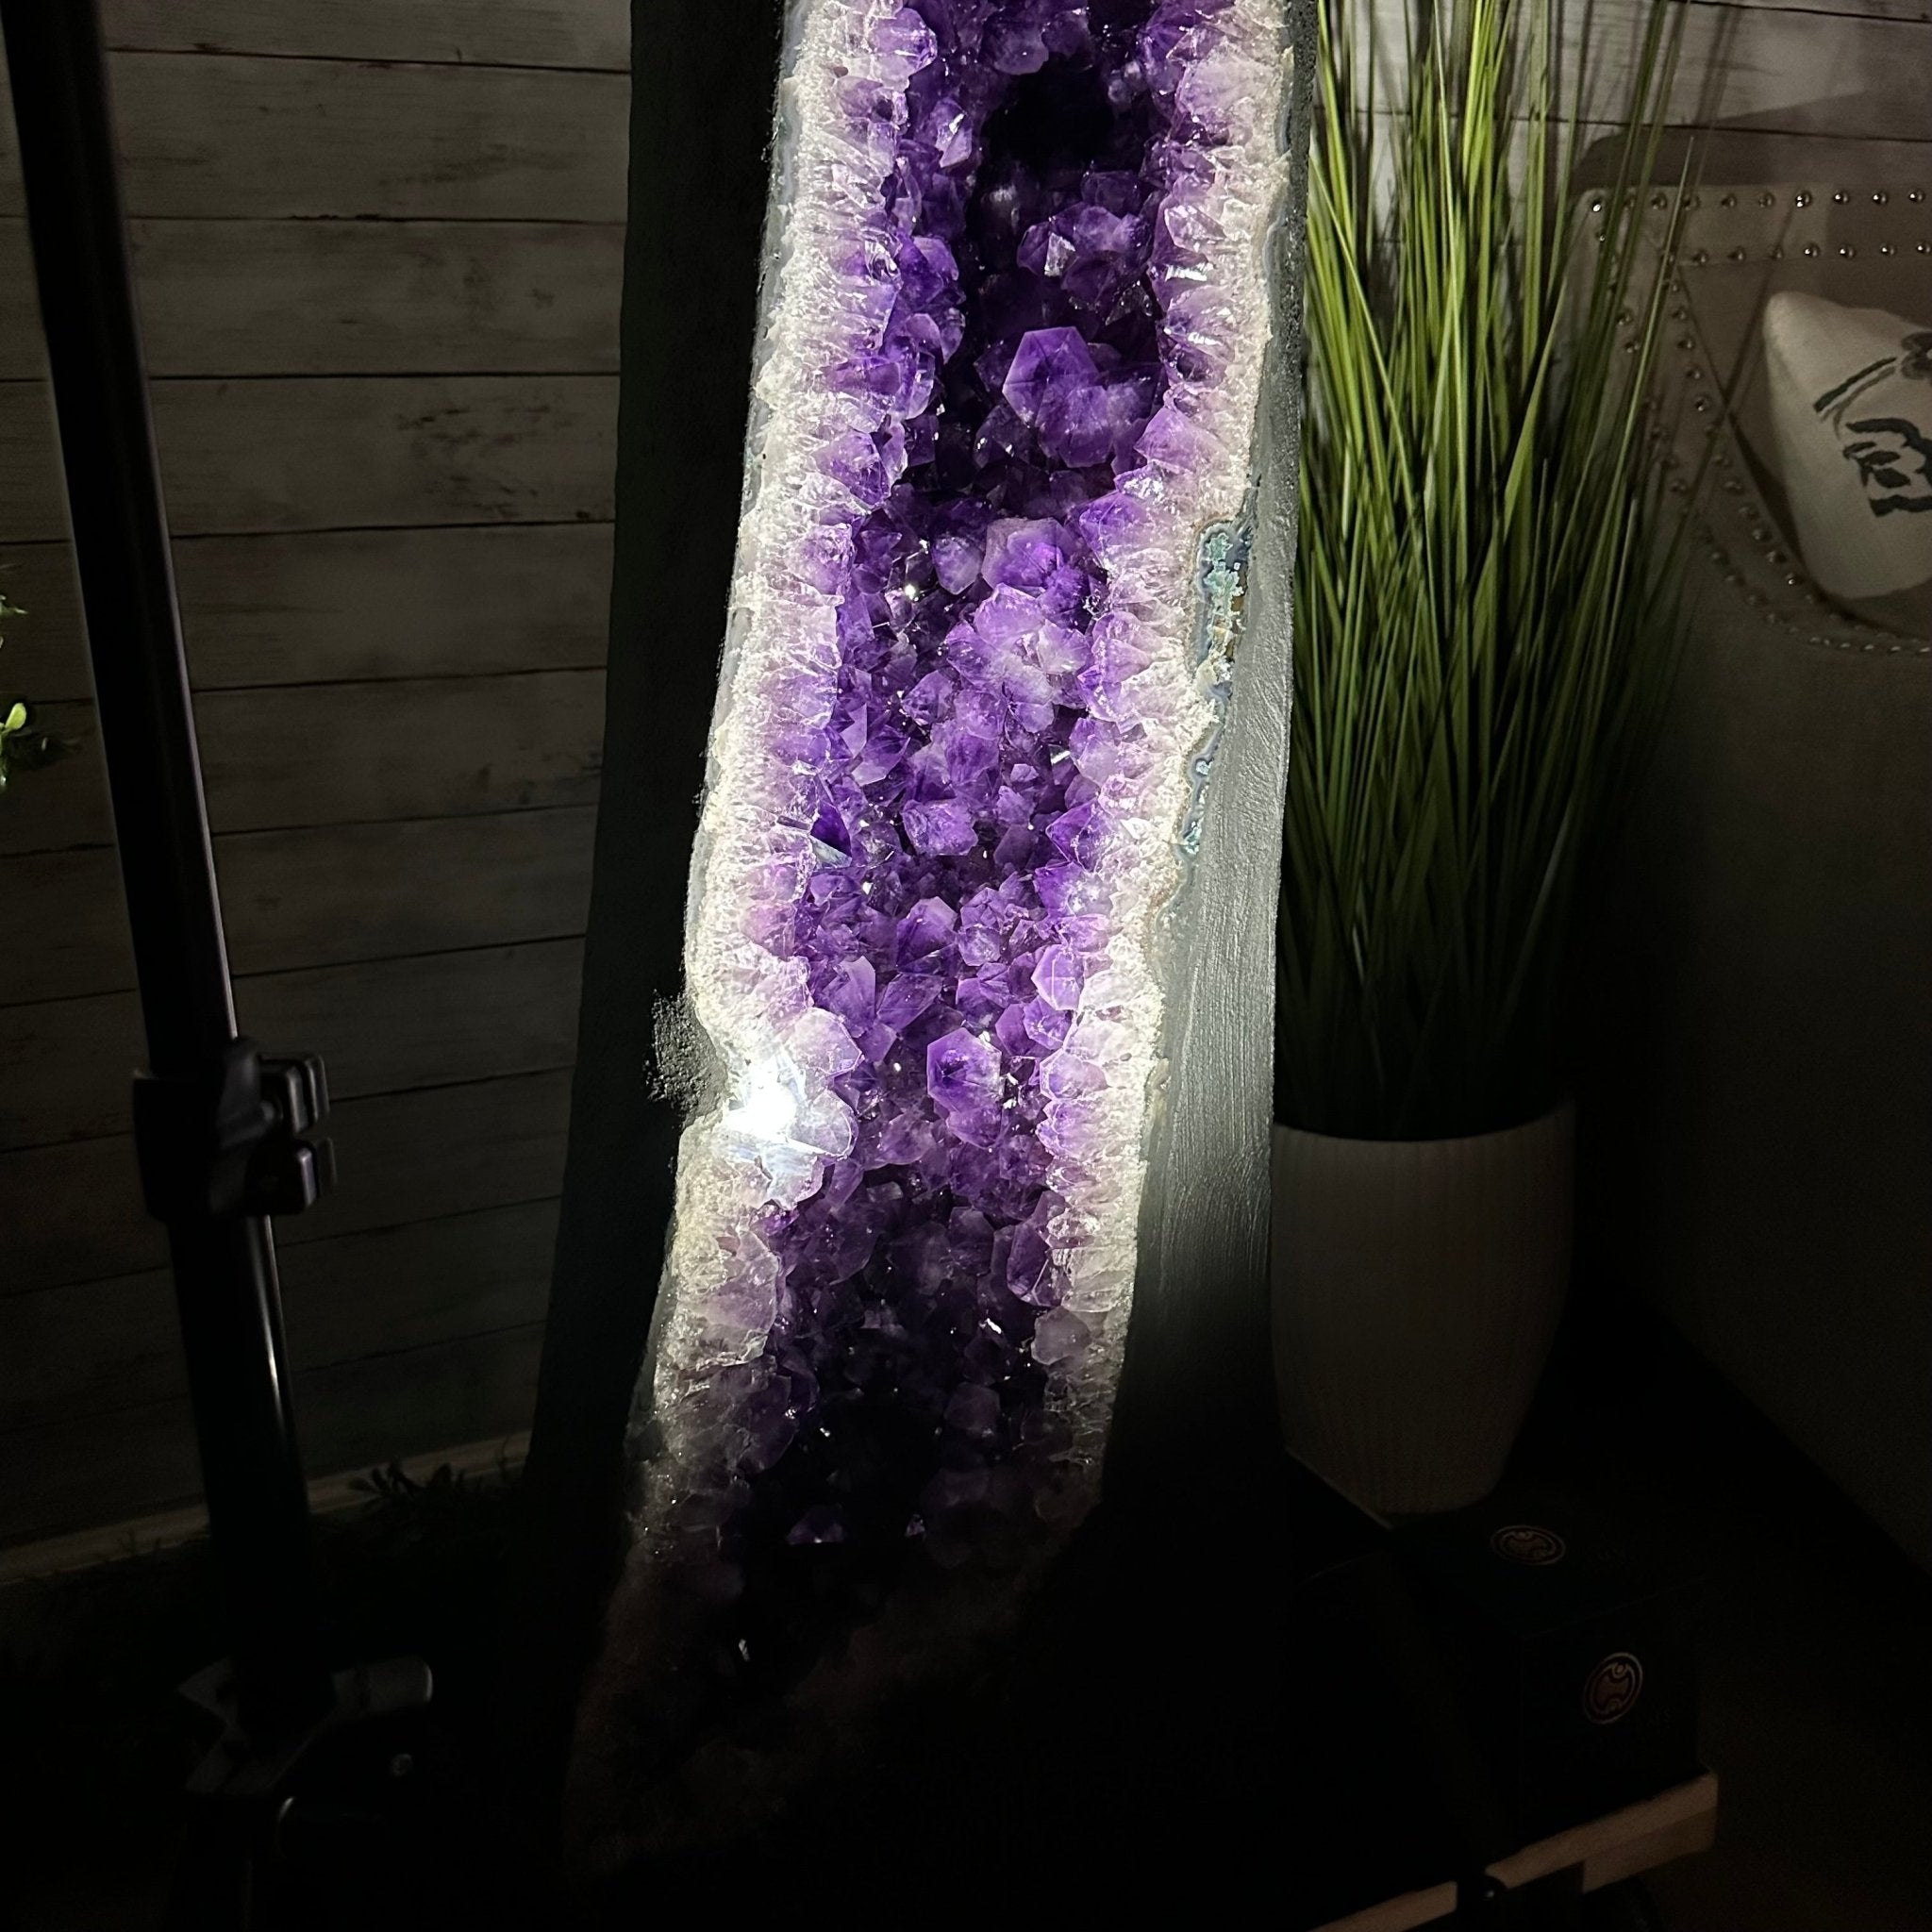 Super Quality Brazilian Amethyst Cathedral, 385 lbs & 72" Tall #5601-1340 - Brazil GemsBrazil GemsSuper Quality Brazilian Amethyst Cathedral, 385 lbs & 72" Tall #5601-1340Cathedrals5601-1340